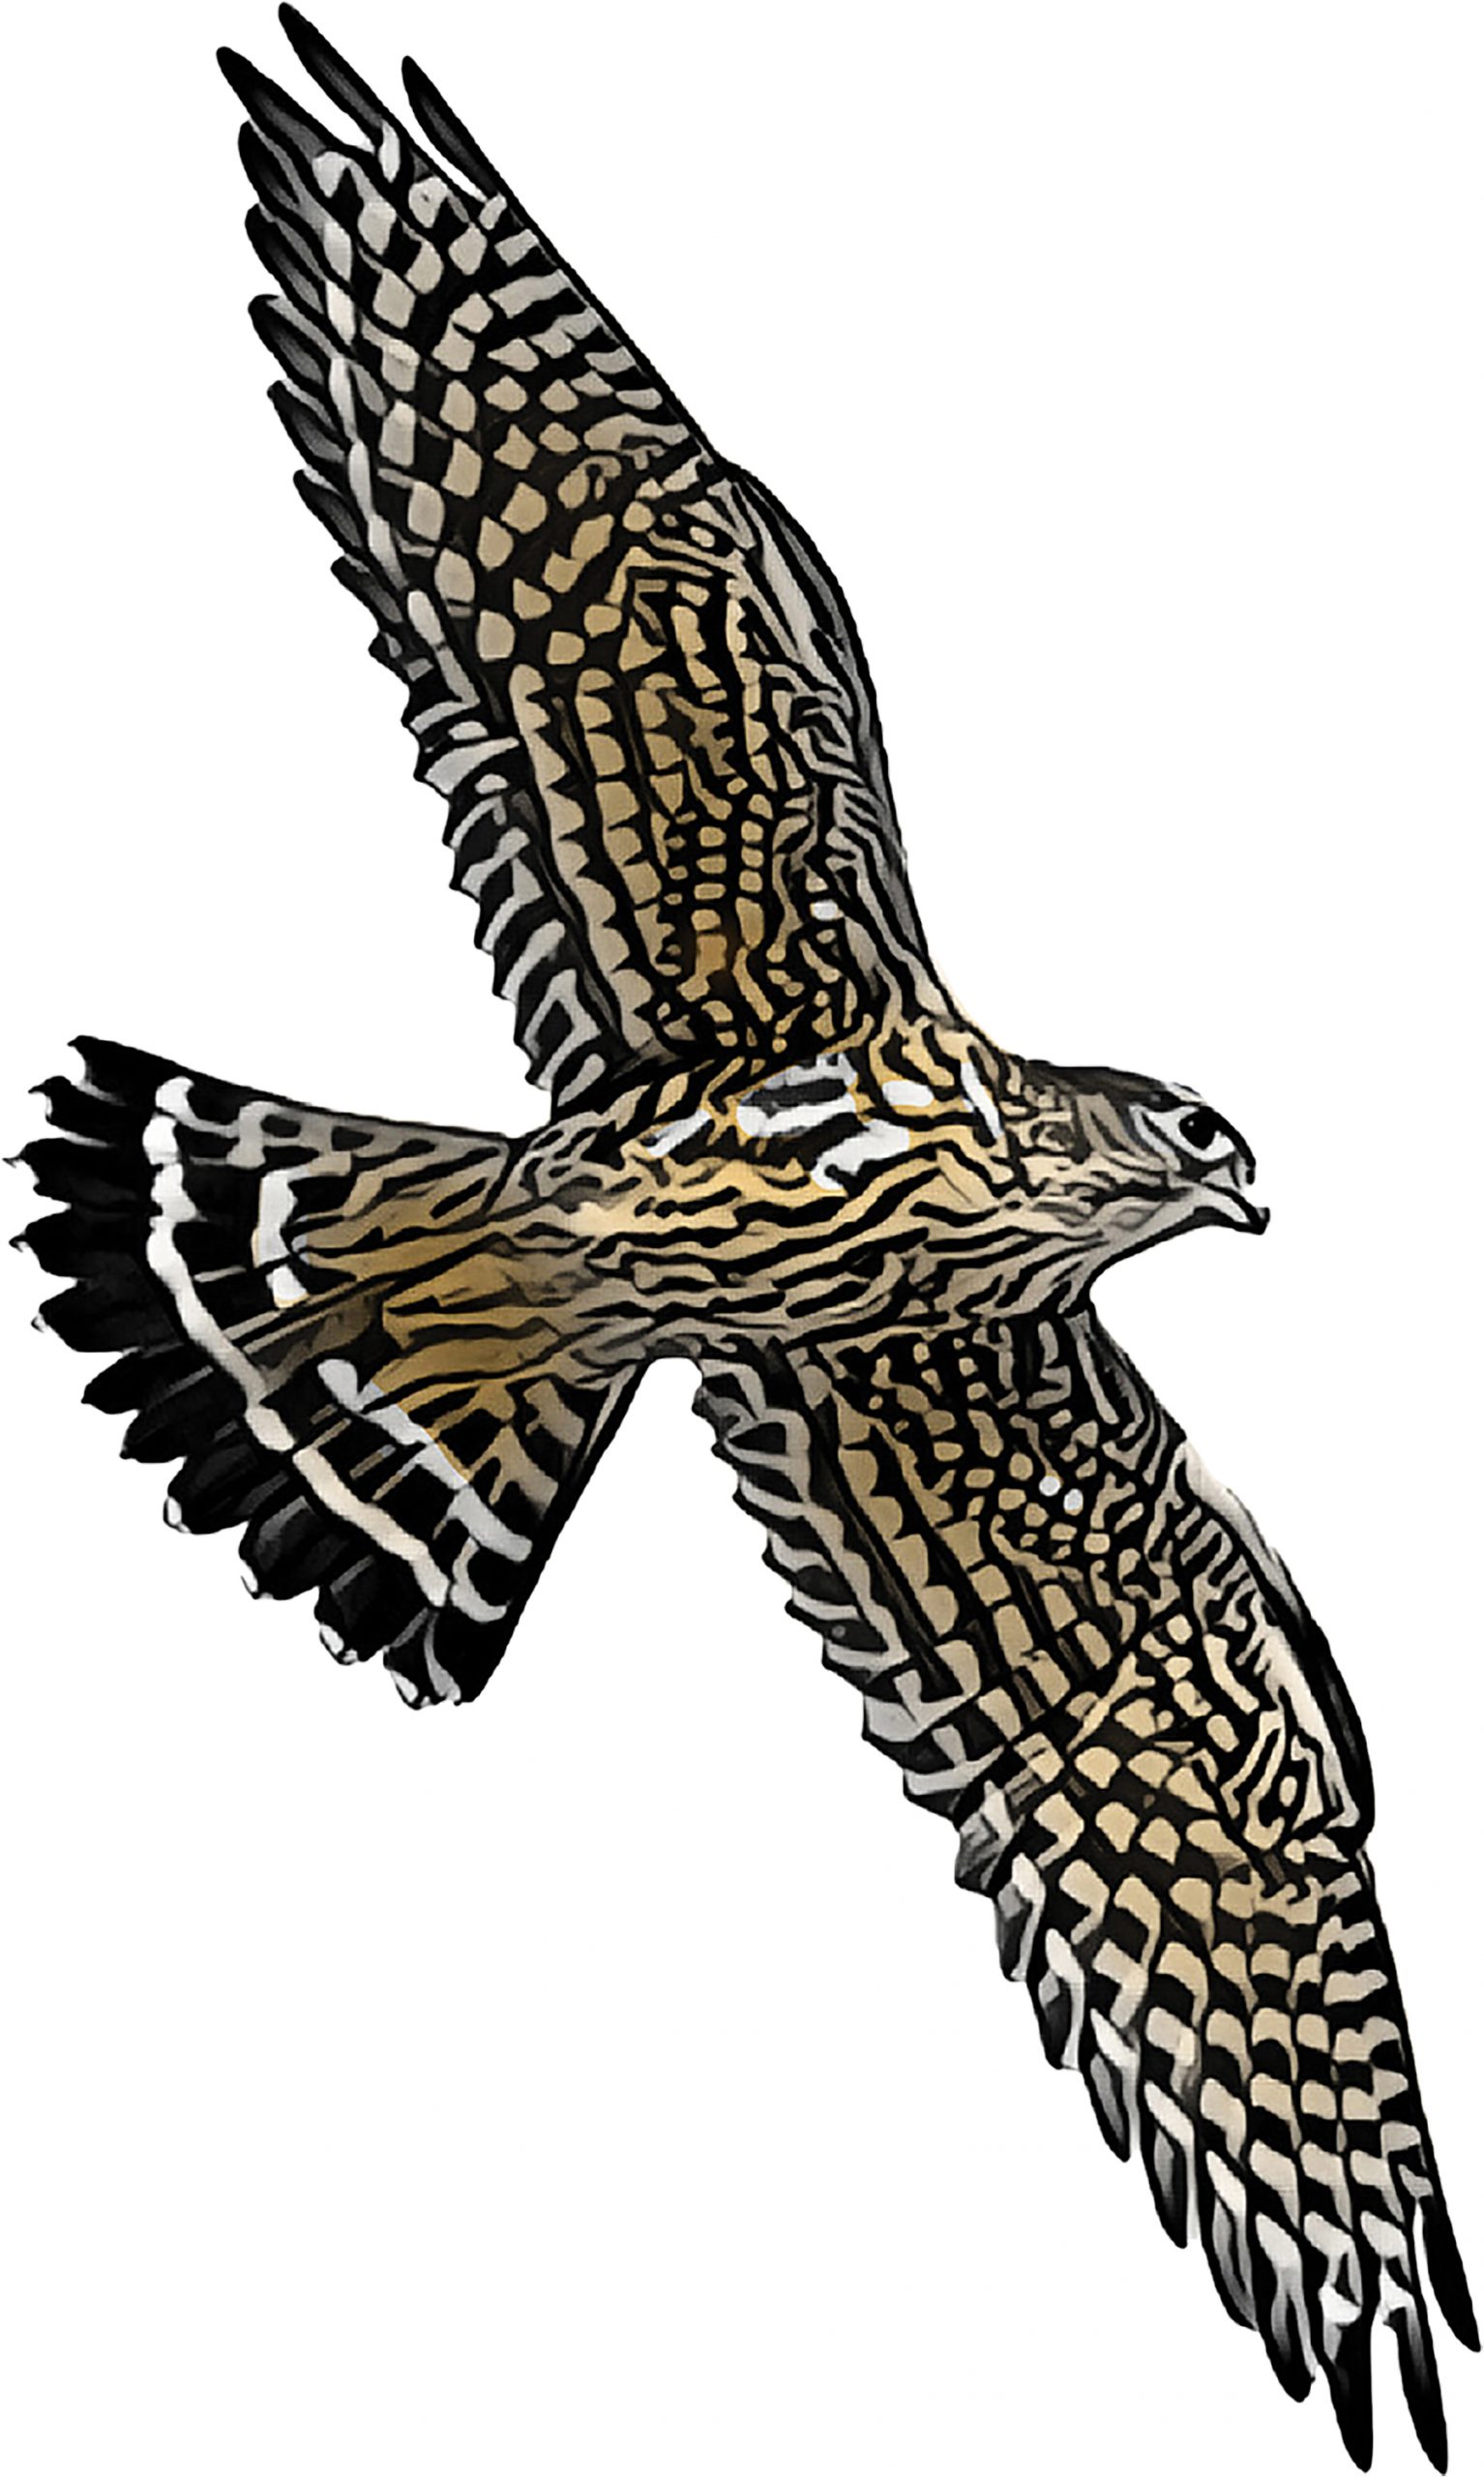 Merlins are small, powerful and bullet-fast, with swept-back, pointed wings and a blocky head with white “eyebrows.”